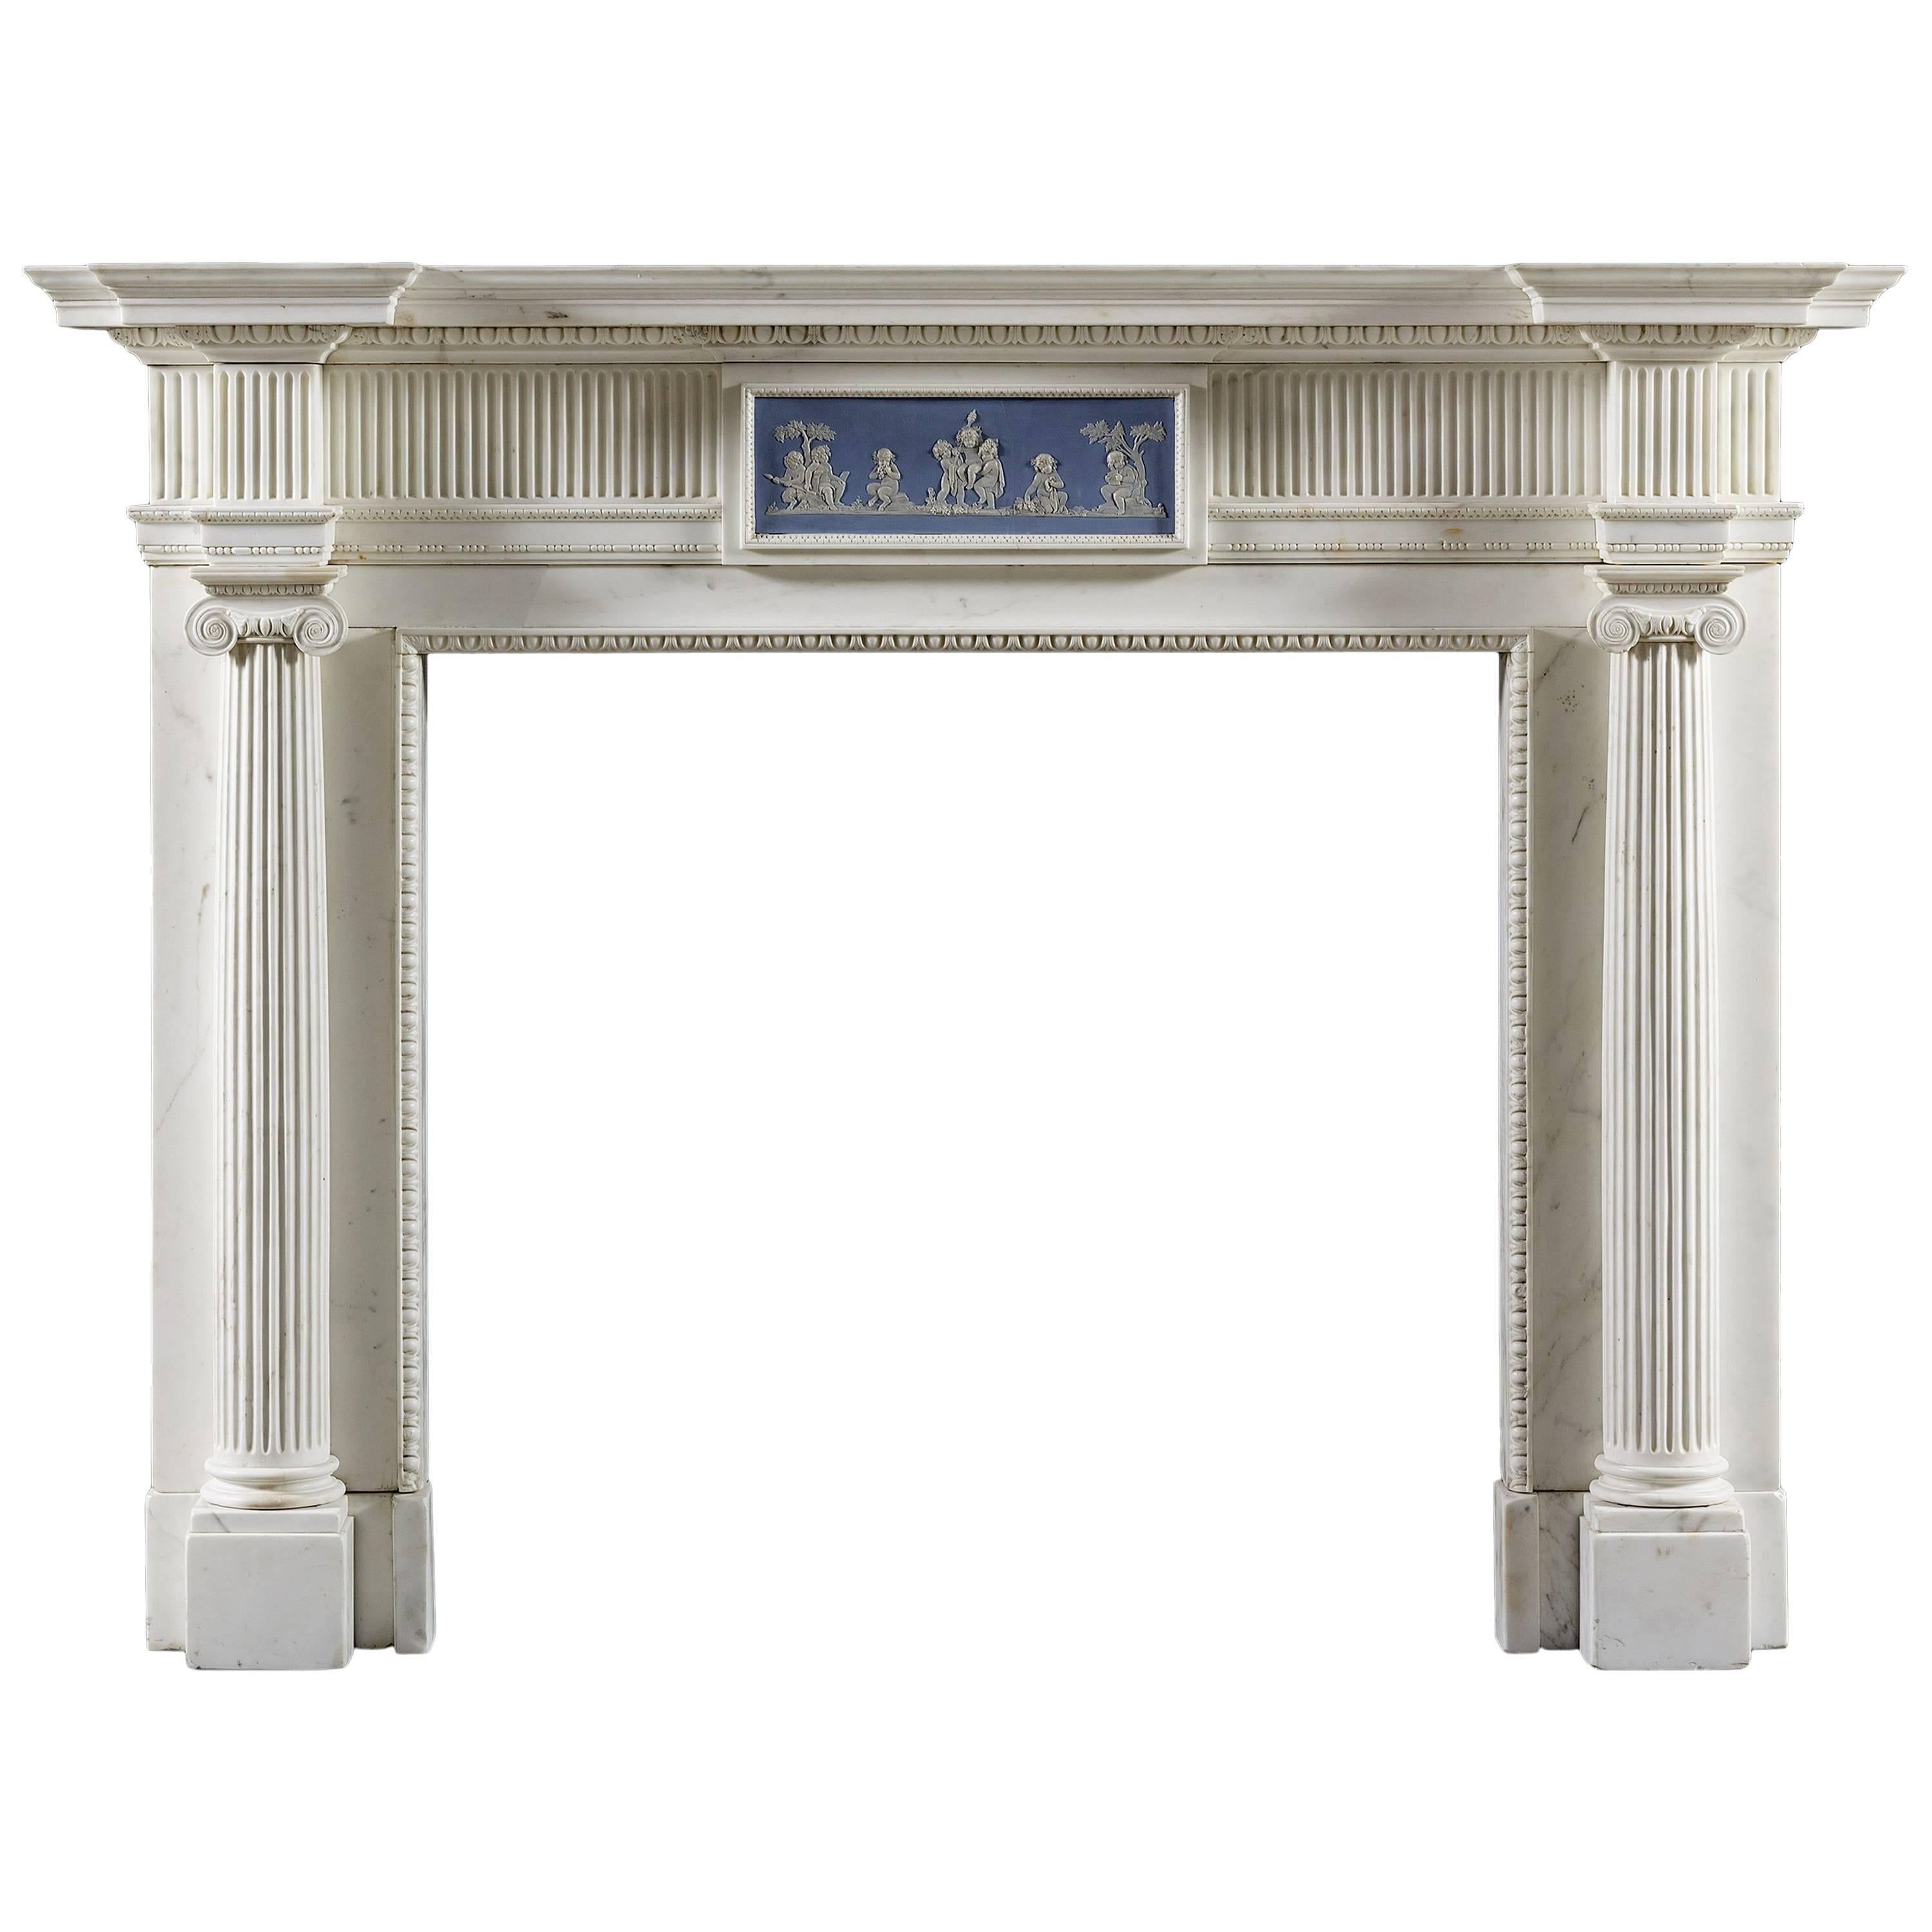 Late 18th Century, Early 19th Century Neoclassical Chimneypiece For Sale